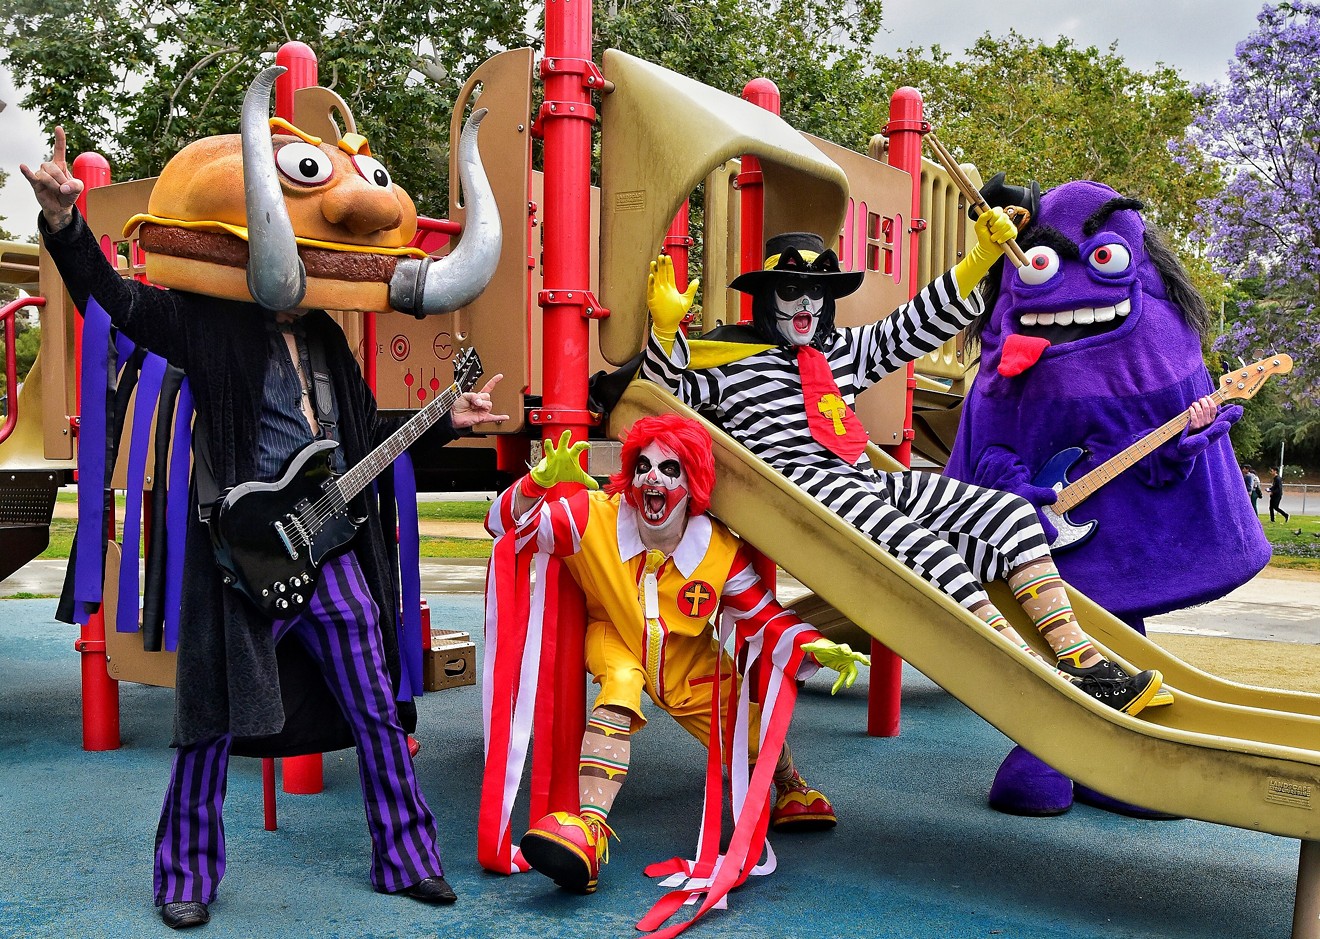 Mac Sabbath is scheduled to perform on Saturday, November 24, at BLK Live in Scottsdale.